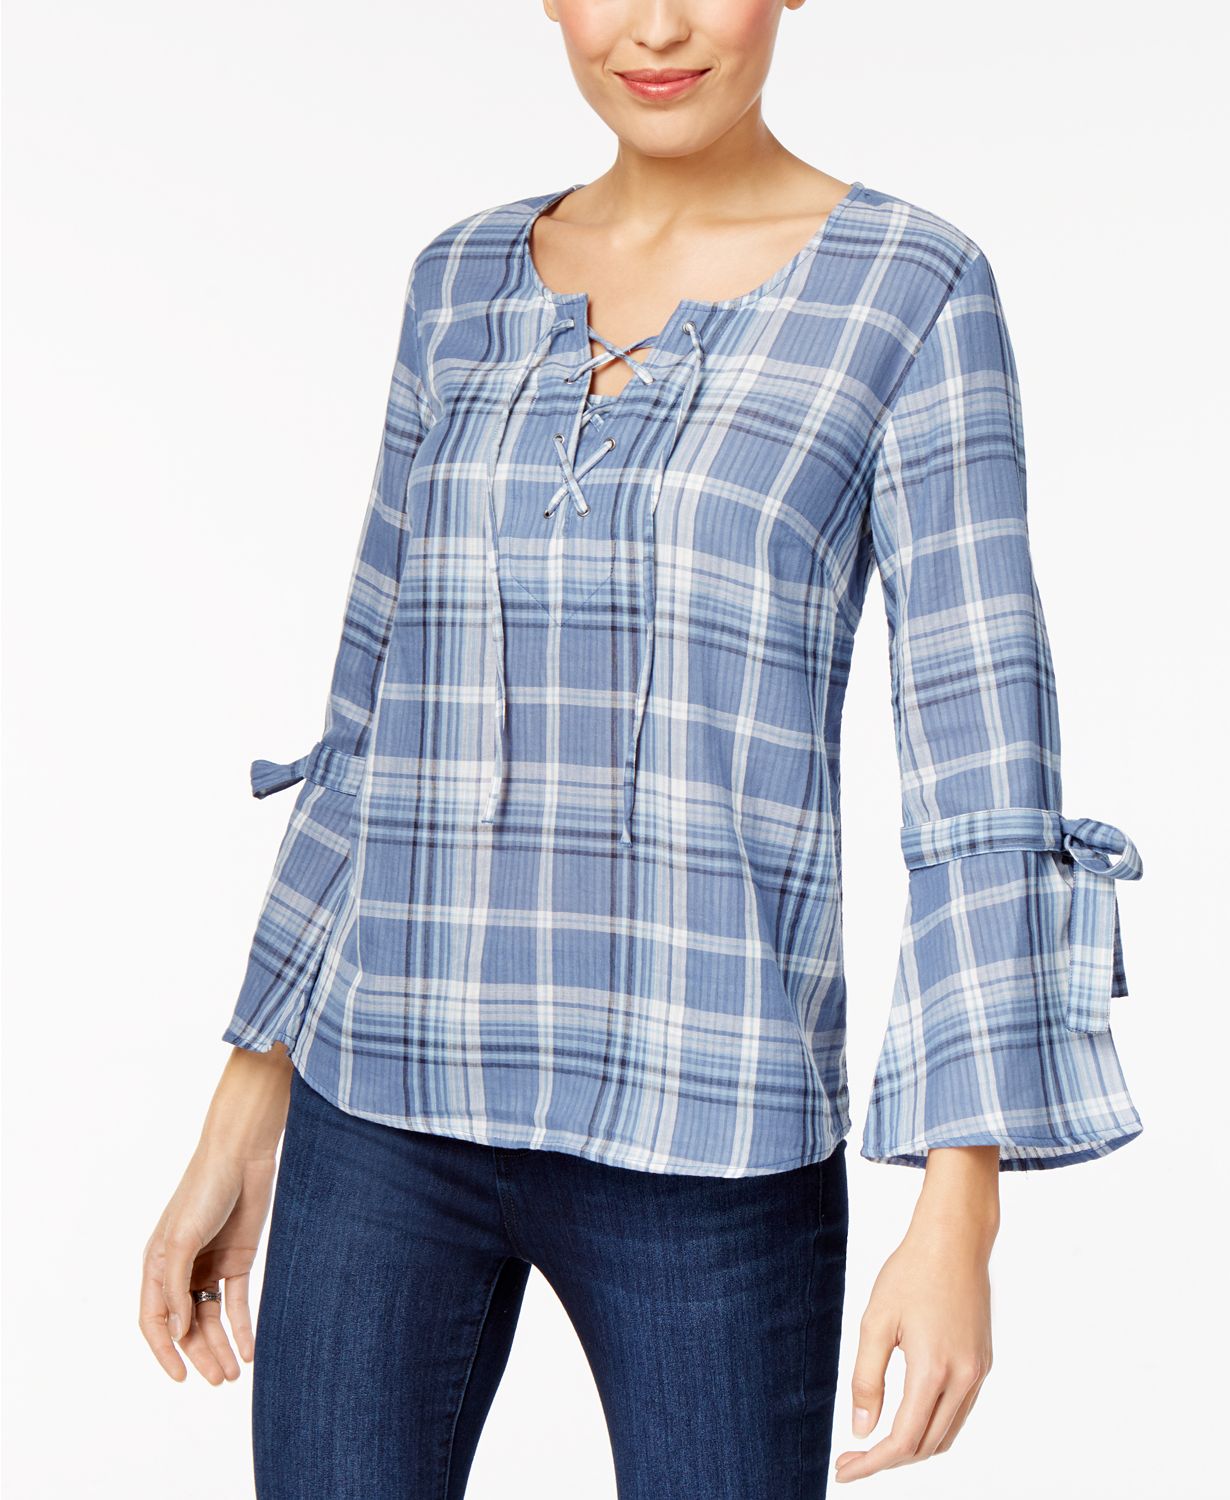 Style Co Cotton Plaid Lace-Up Top Clear Skies XXL